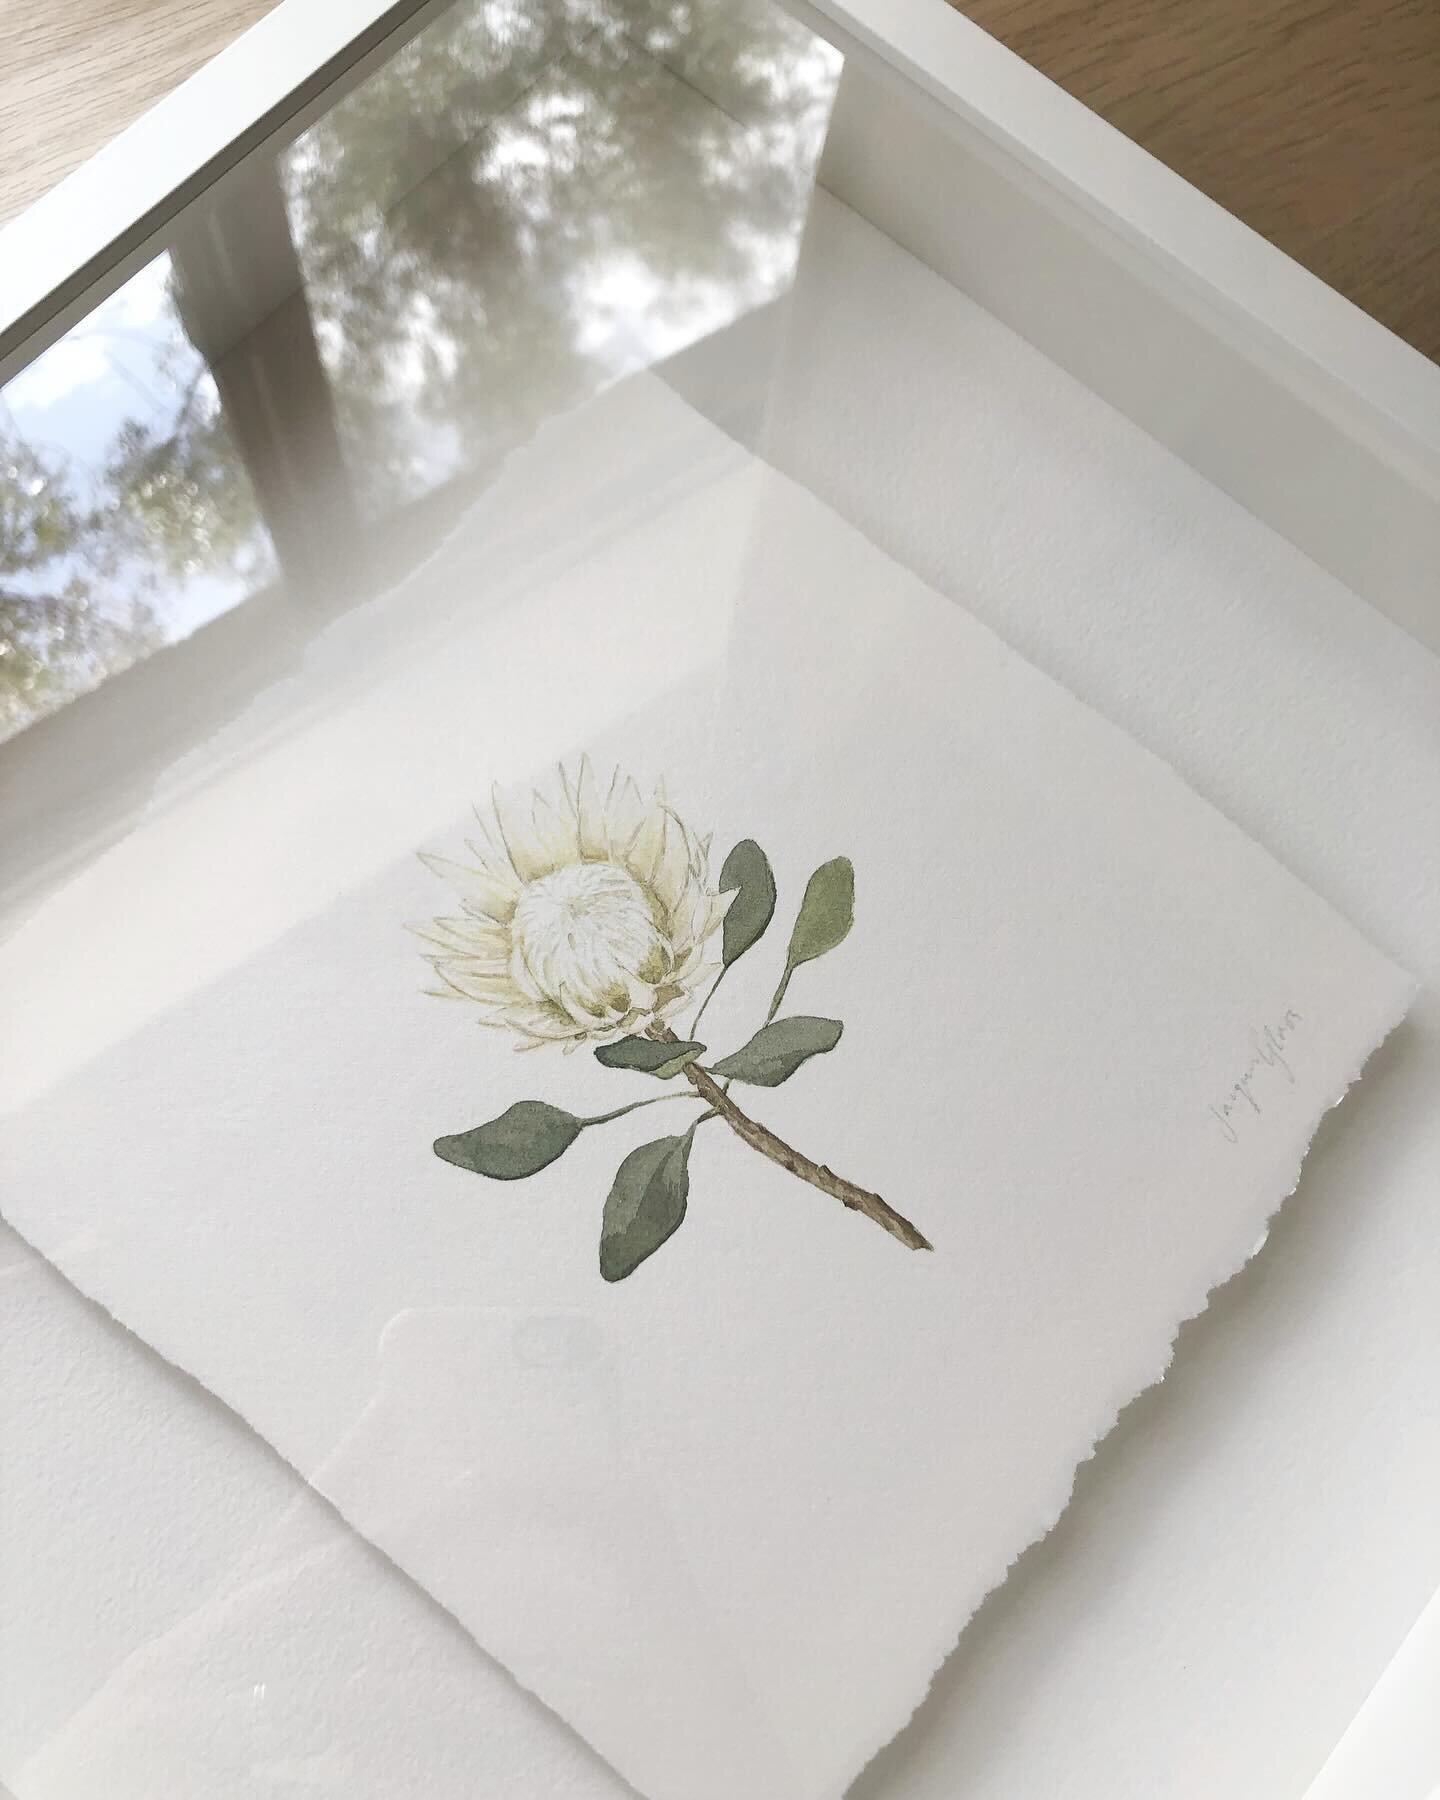 Forever Flowers 🤍 who says you can&rsquo;t paint white flowers on white paper 🙃 

I really love preserving wedding flowers in this way. It&rsquo;s delicate and timeless and a beautiful way to remind you of your special day. 

And of course you can 